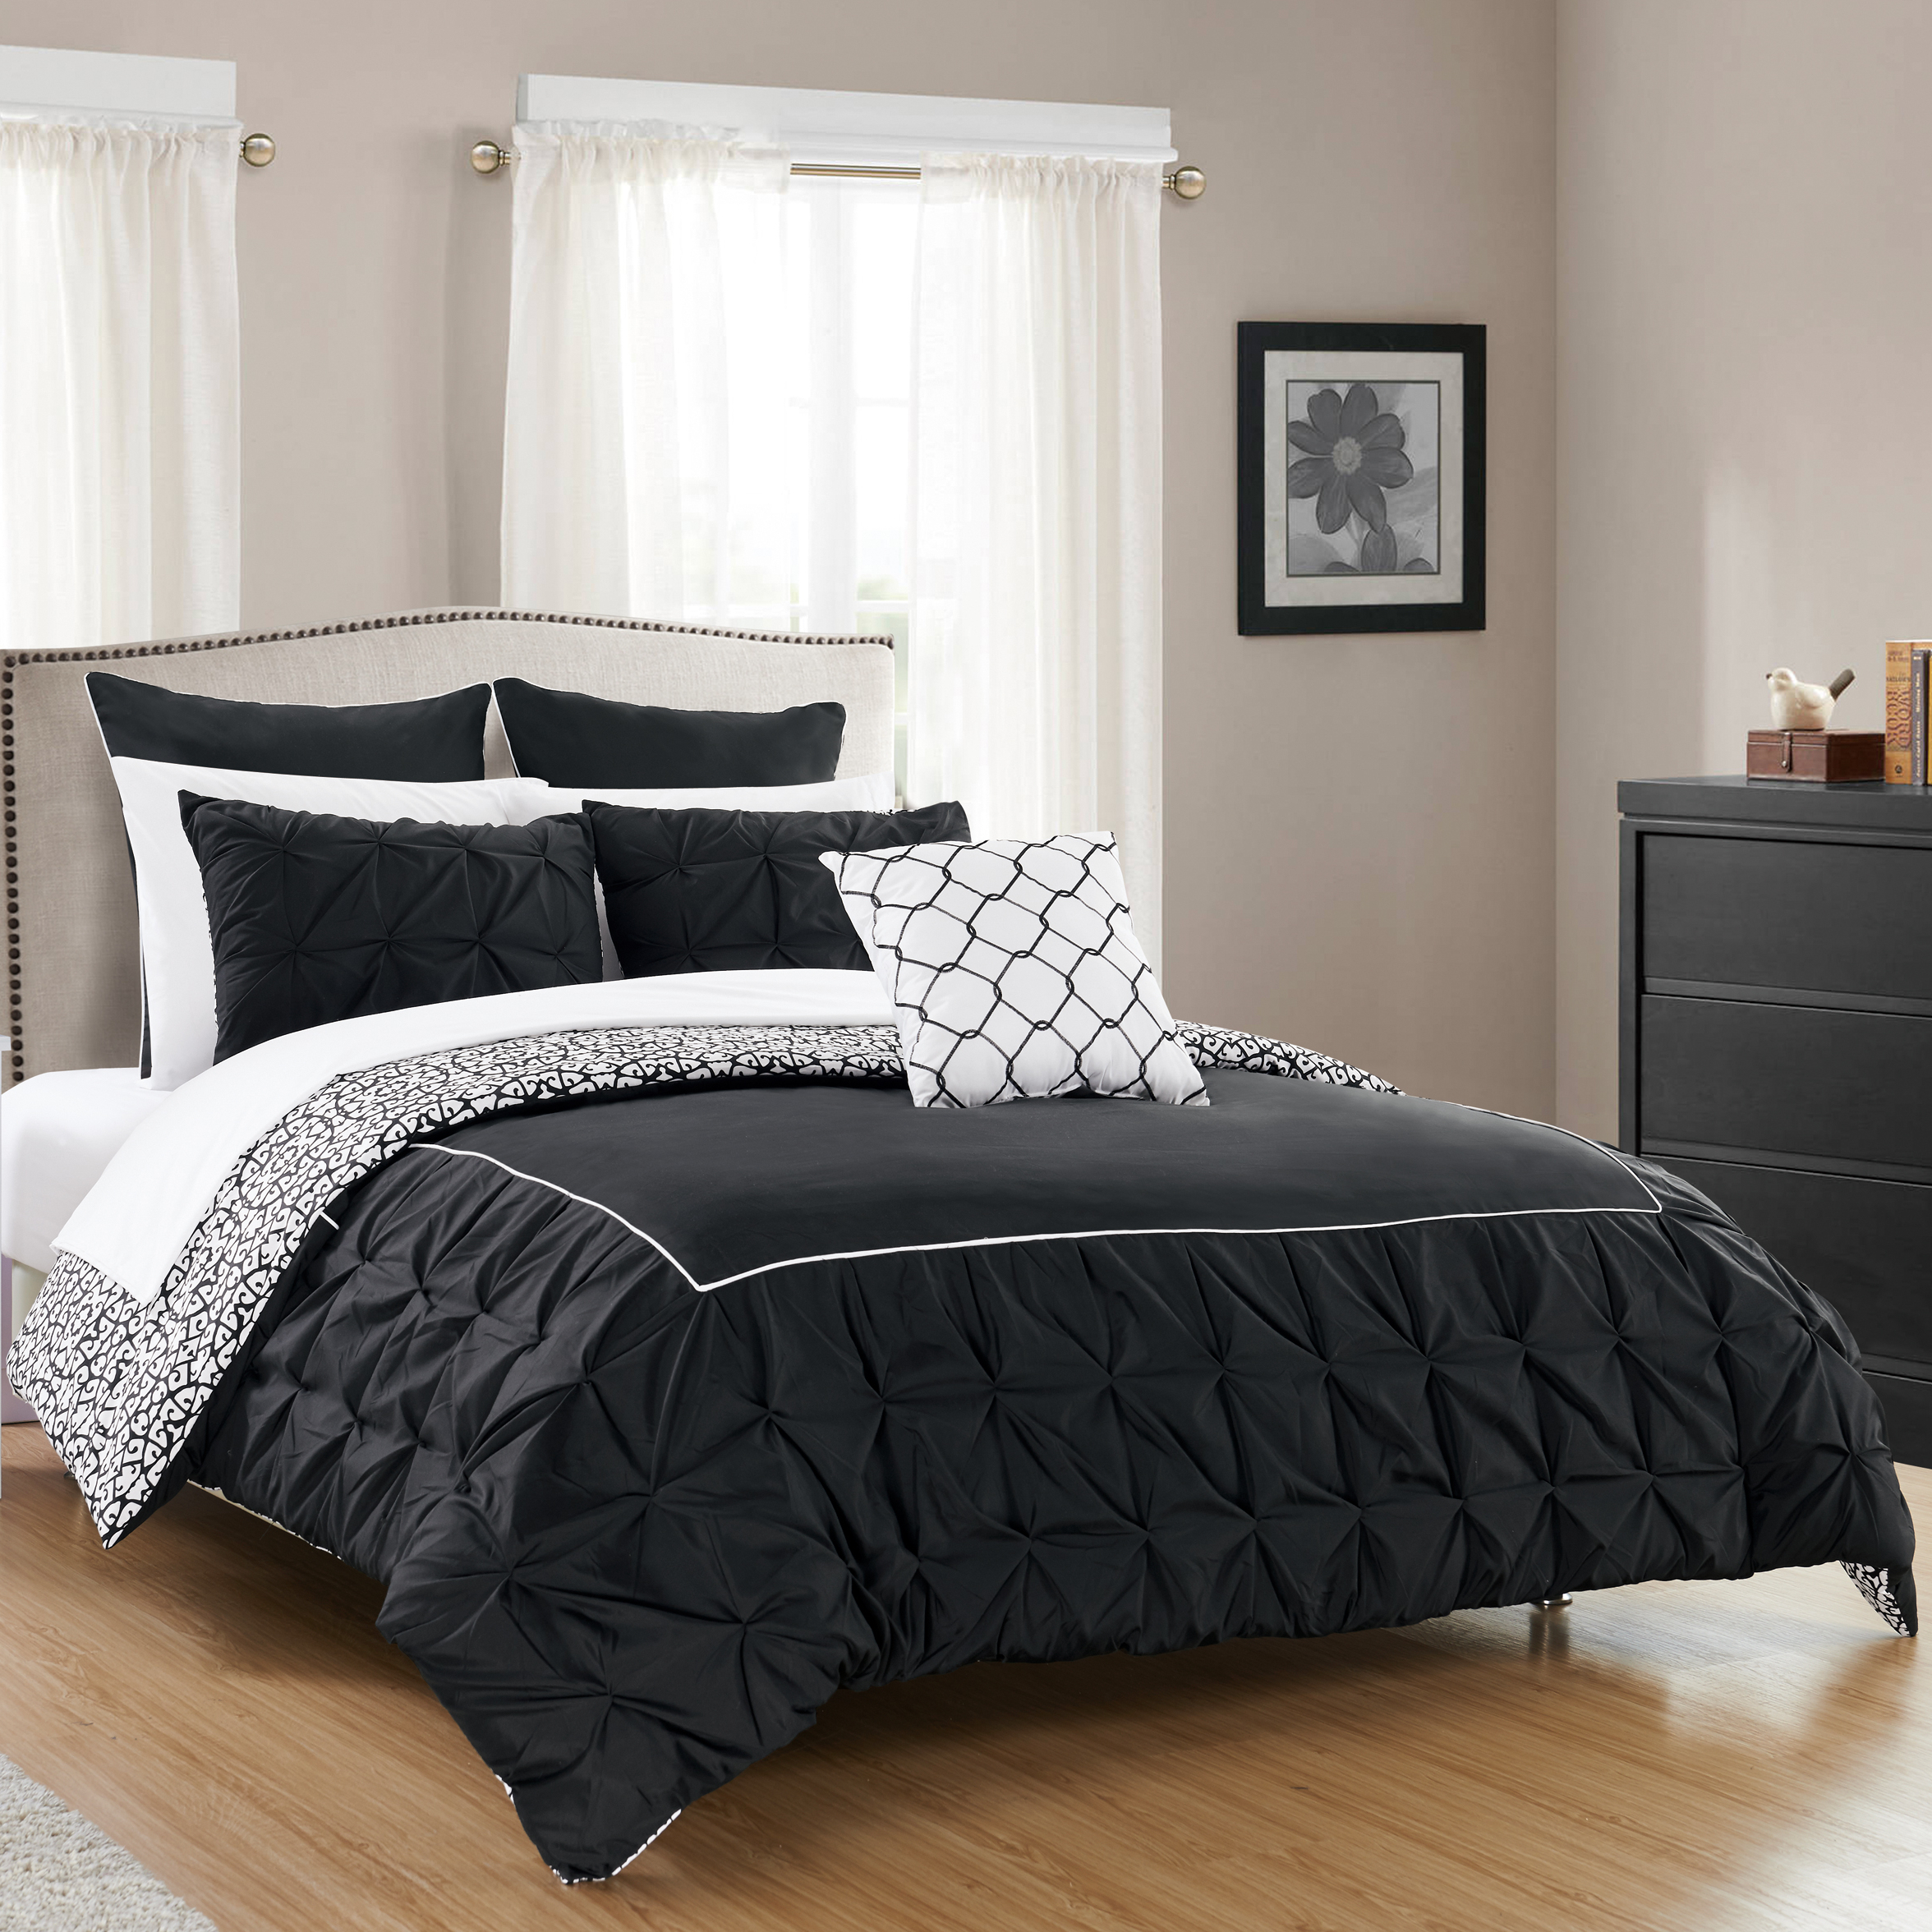 Keppel 10 Piece Comforter Set Complete Bed In A Bag Pleated Ruffles And Reversible Print Bedding With Sheet Set - Black, Twin